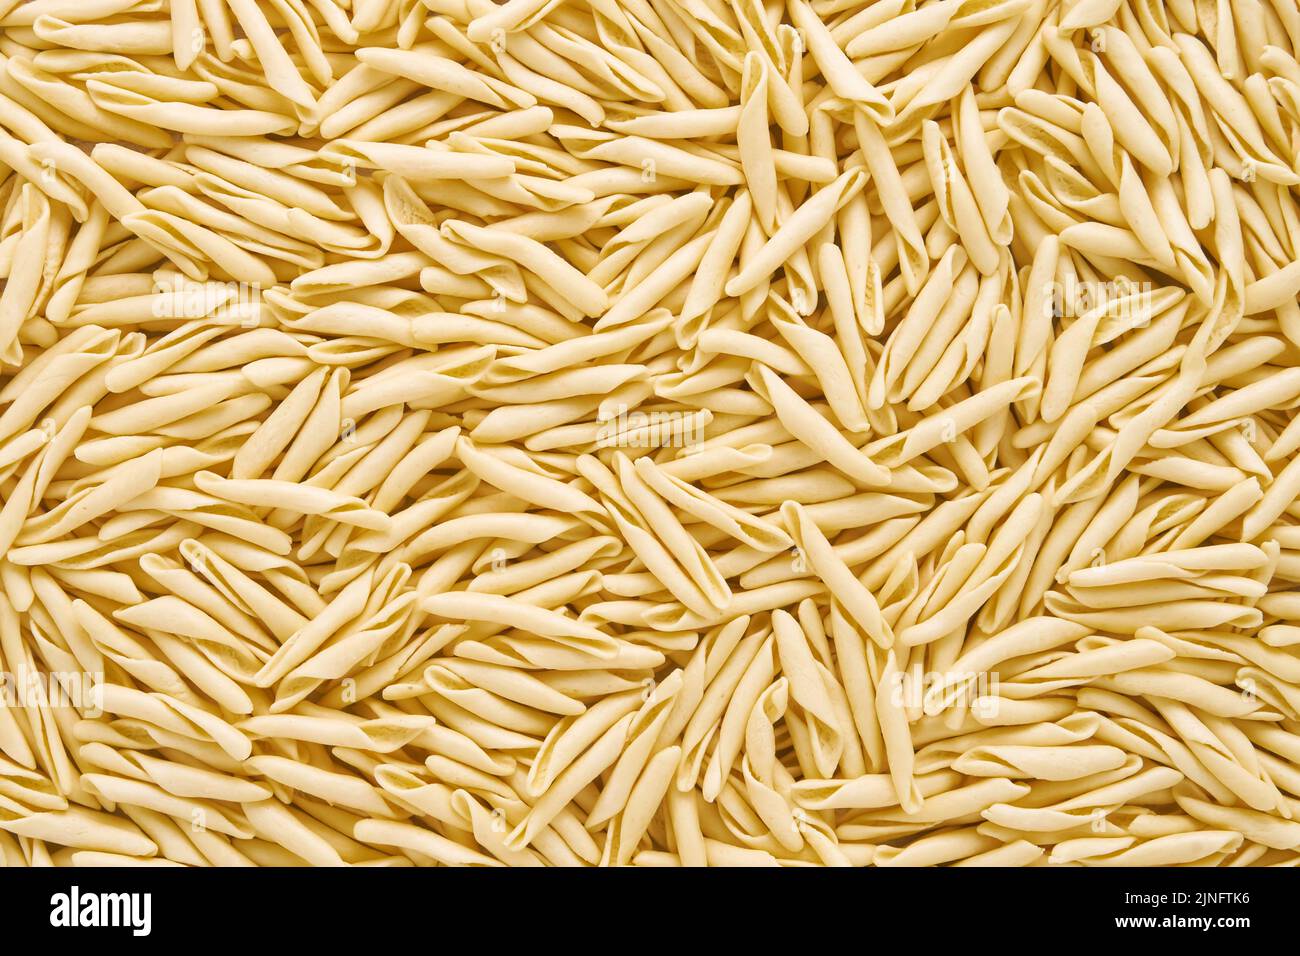 Food background. Dried trofie pasta from Liguria. Short twisted pasta, top view Stock Photo